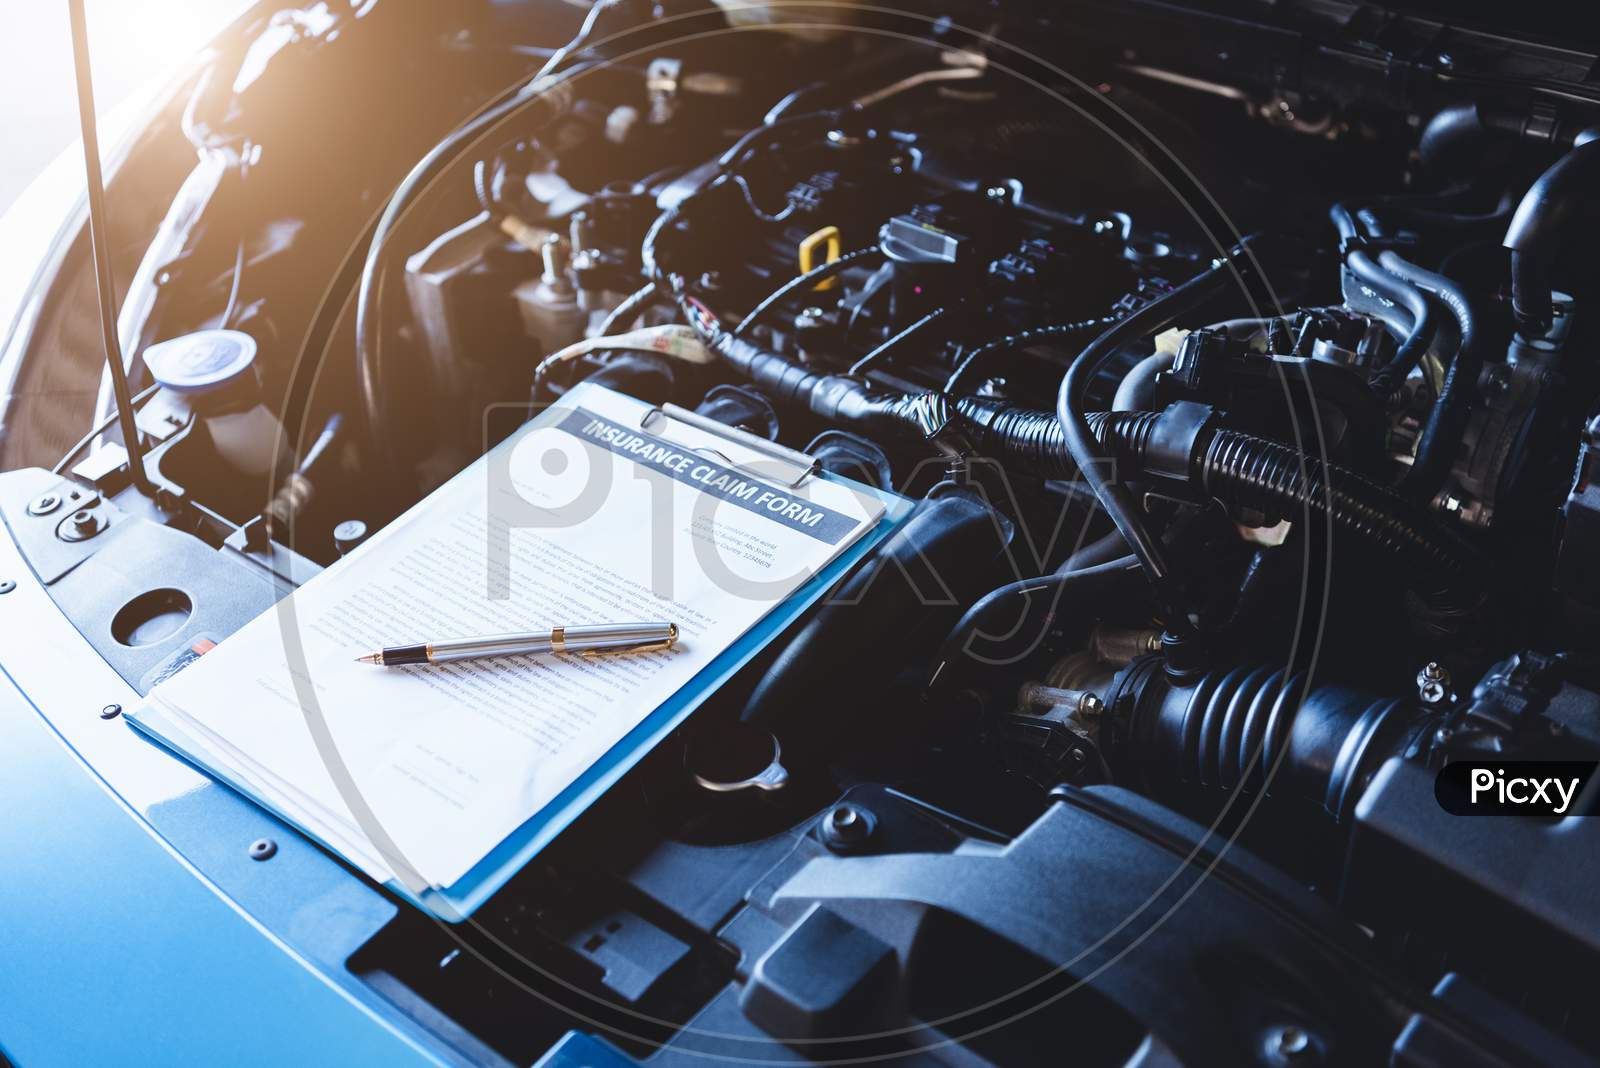 Clipboard On Car With Car Insurance Claim Form For Customer Maintenance Vehicle Checklist In Auto Repair Shop Garage. Engine Repair Service Concept. Business Technical Mechanics Support For Fixing Car